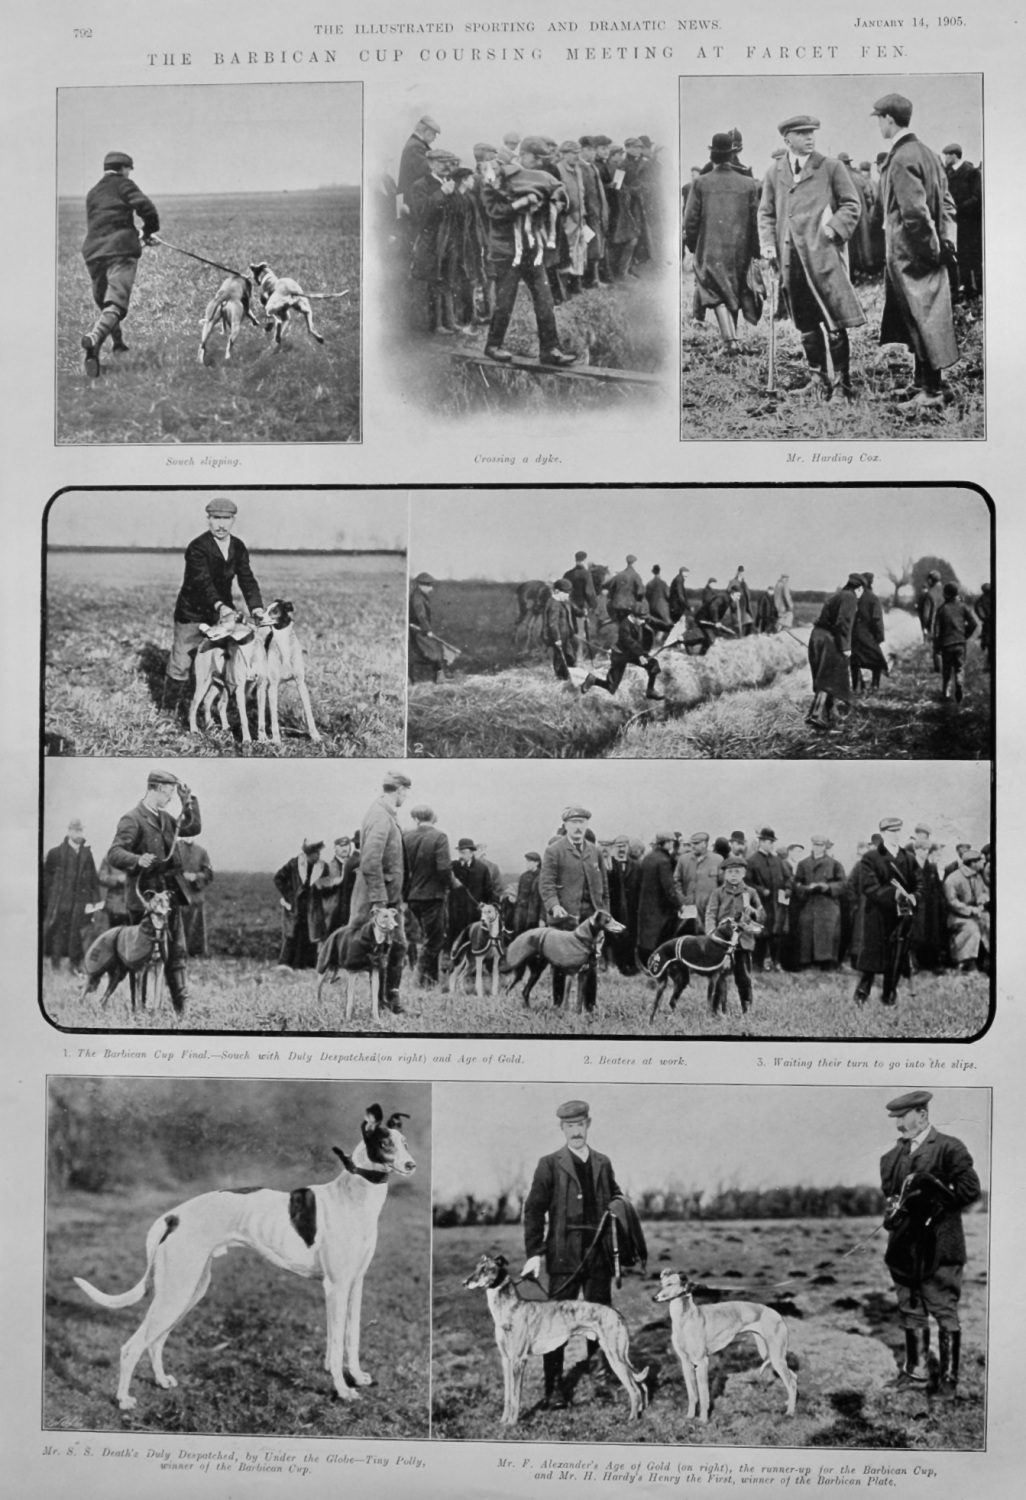 The Barbican Cup Coursing Meeting at Faucet Fen.  1905.